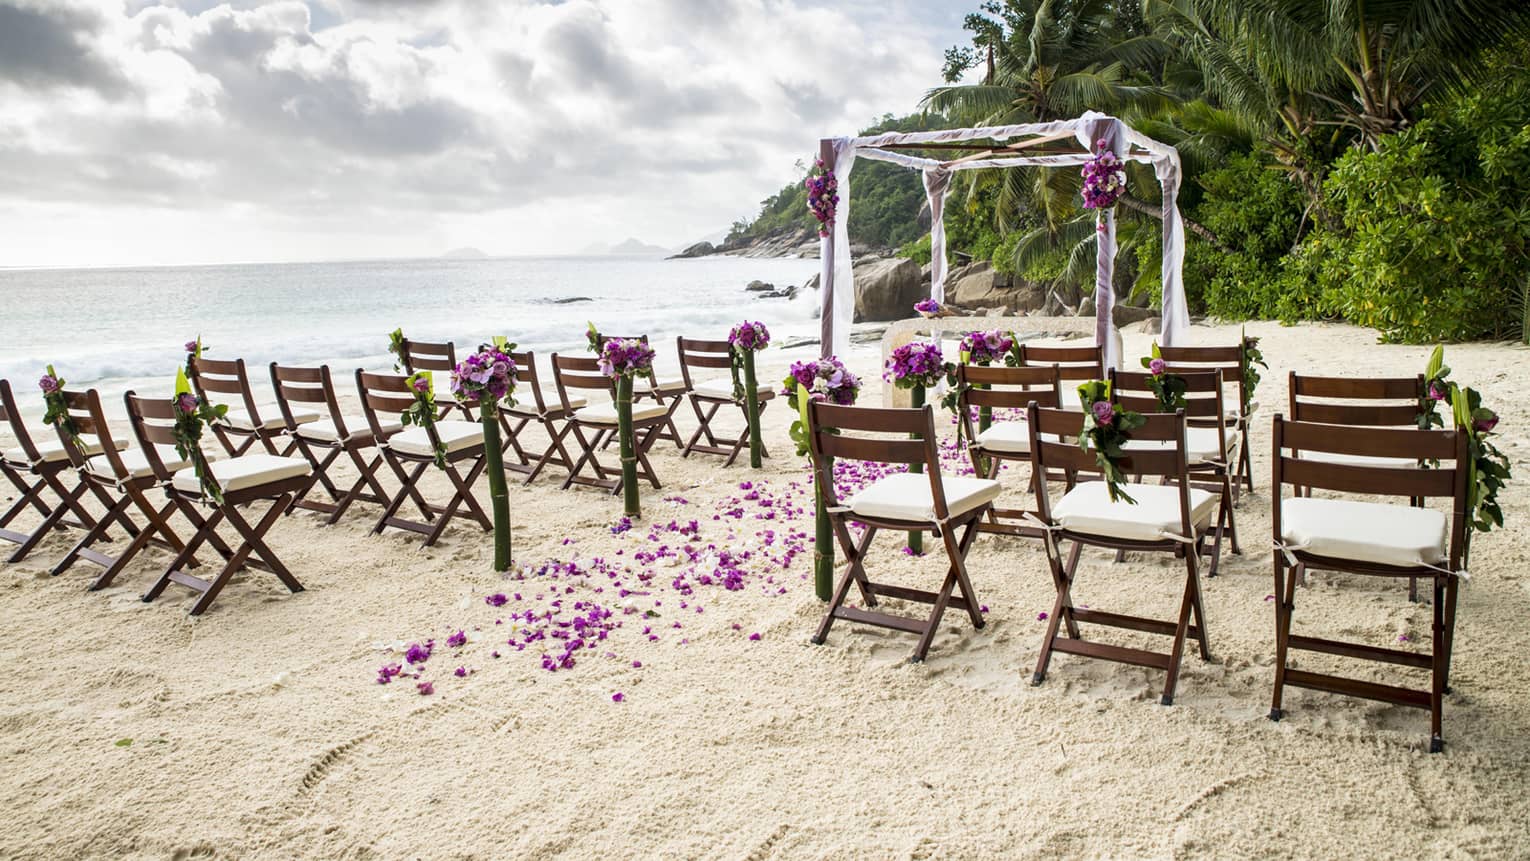 Rows of wooden chairs on sand in front of canopy decorated with purple flowers by ocean